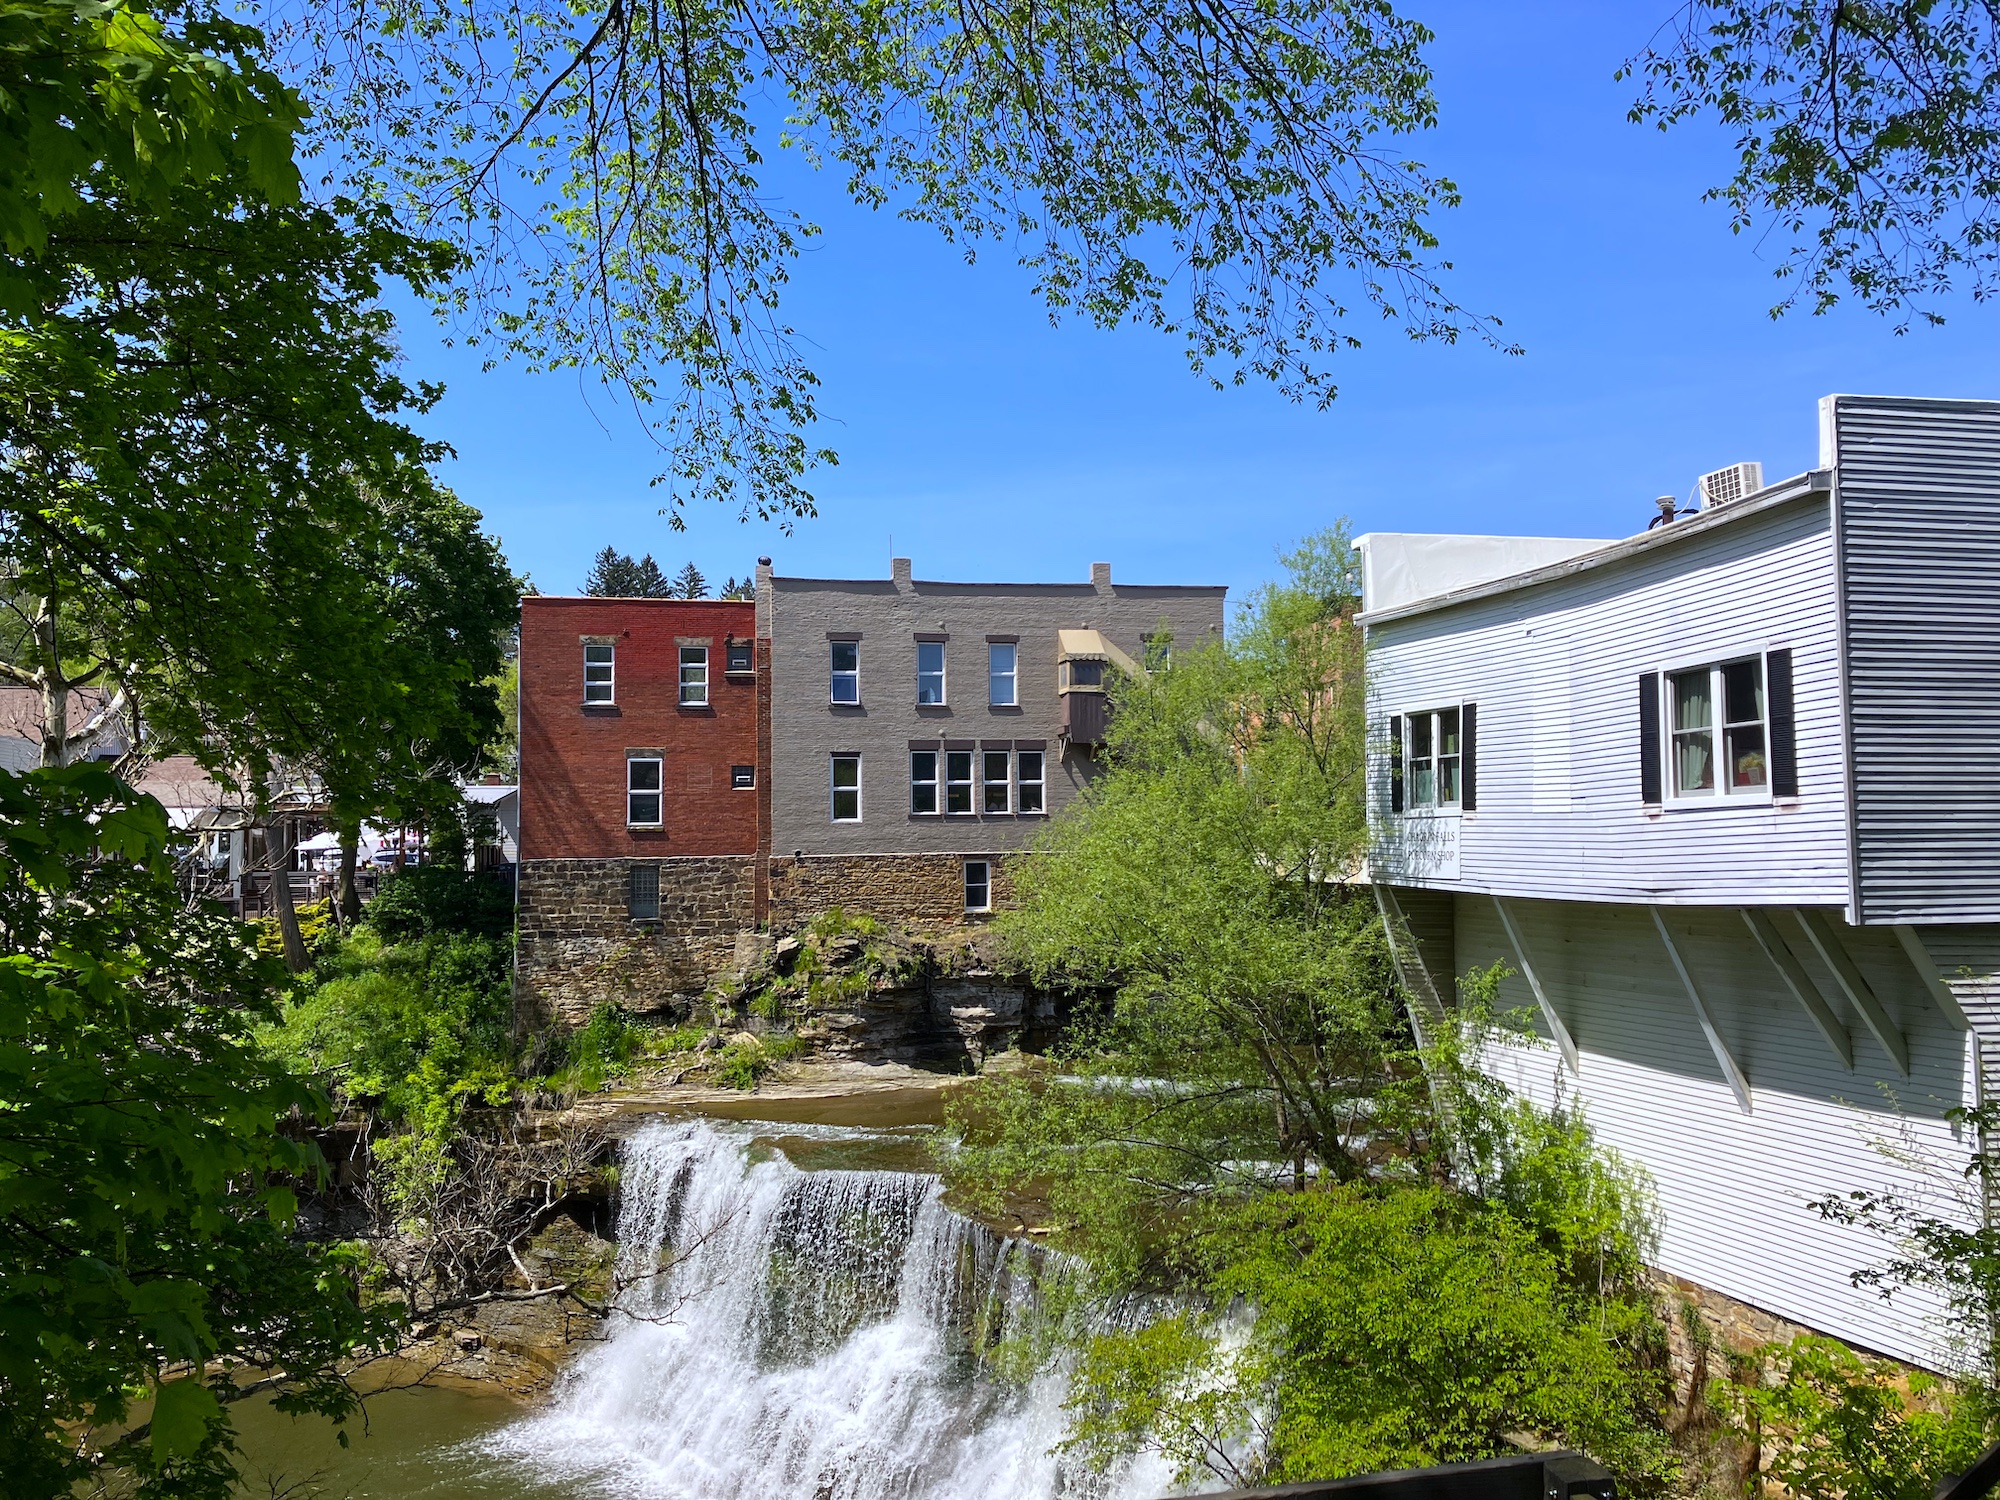 View of the Falls in Chagrin Falls, Ohio